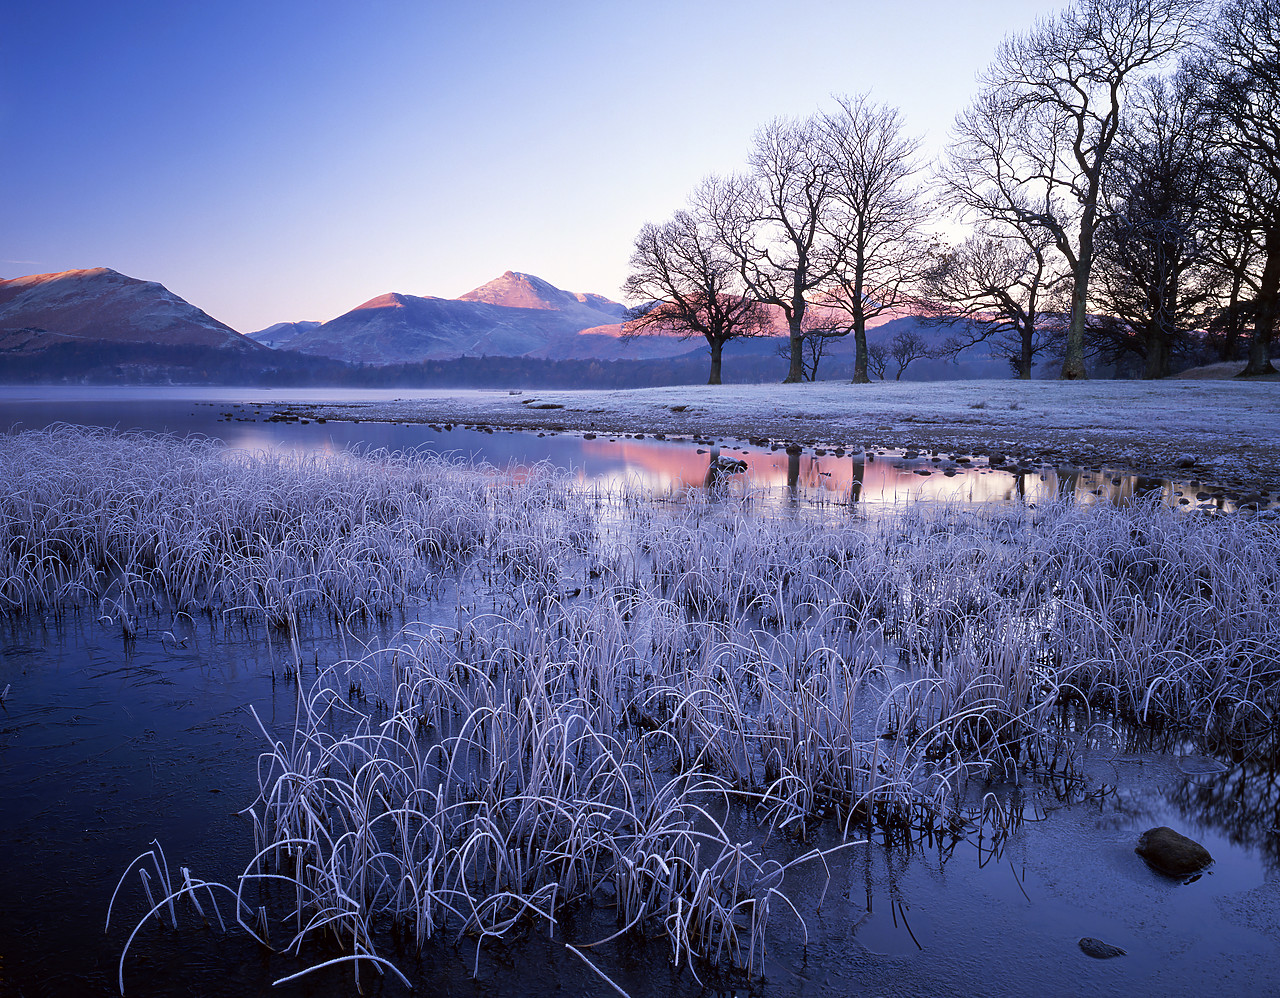 #892580-1 - Frost on Derwent Water, Lake District National Park, Cumbria, England